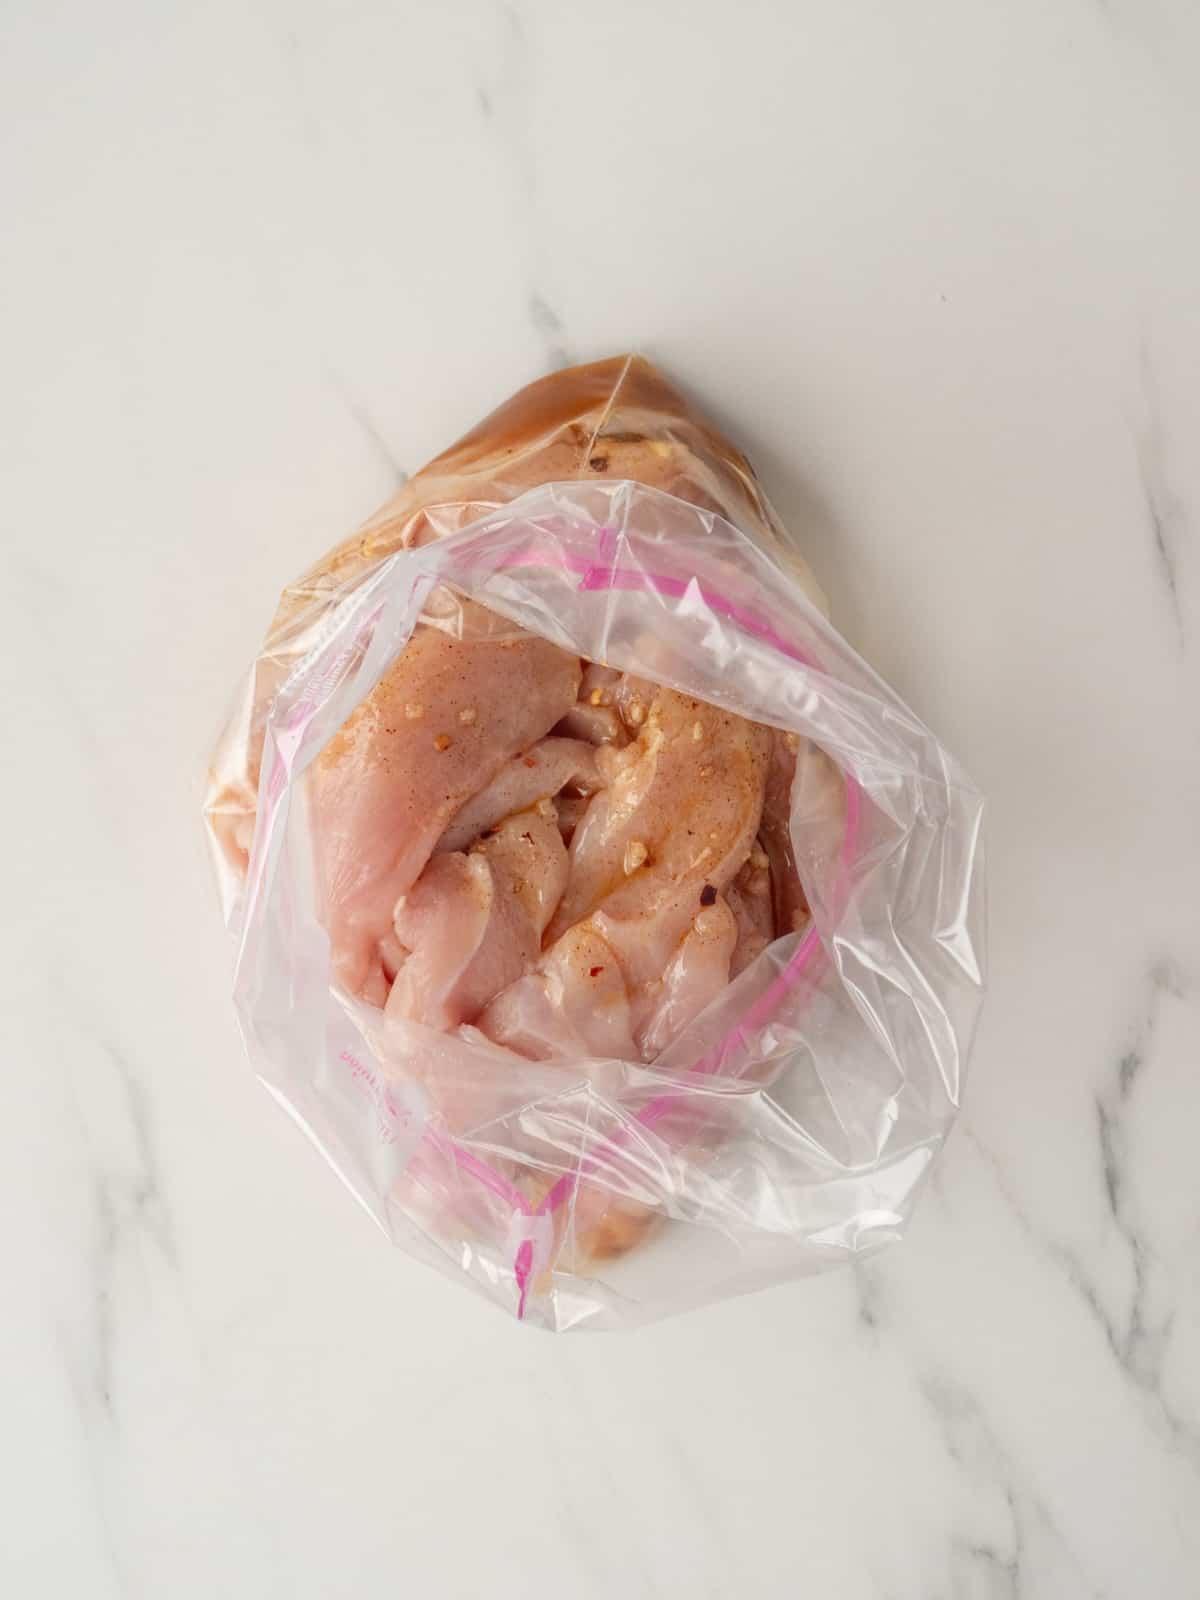 A zip top bag with chicken breasts and marinade mixed together.